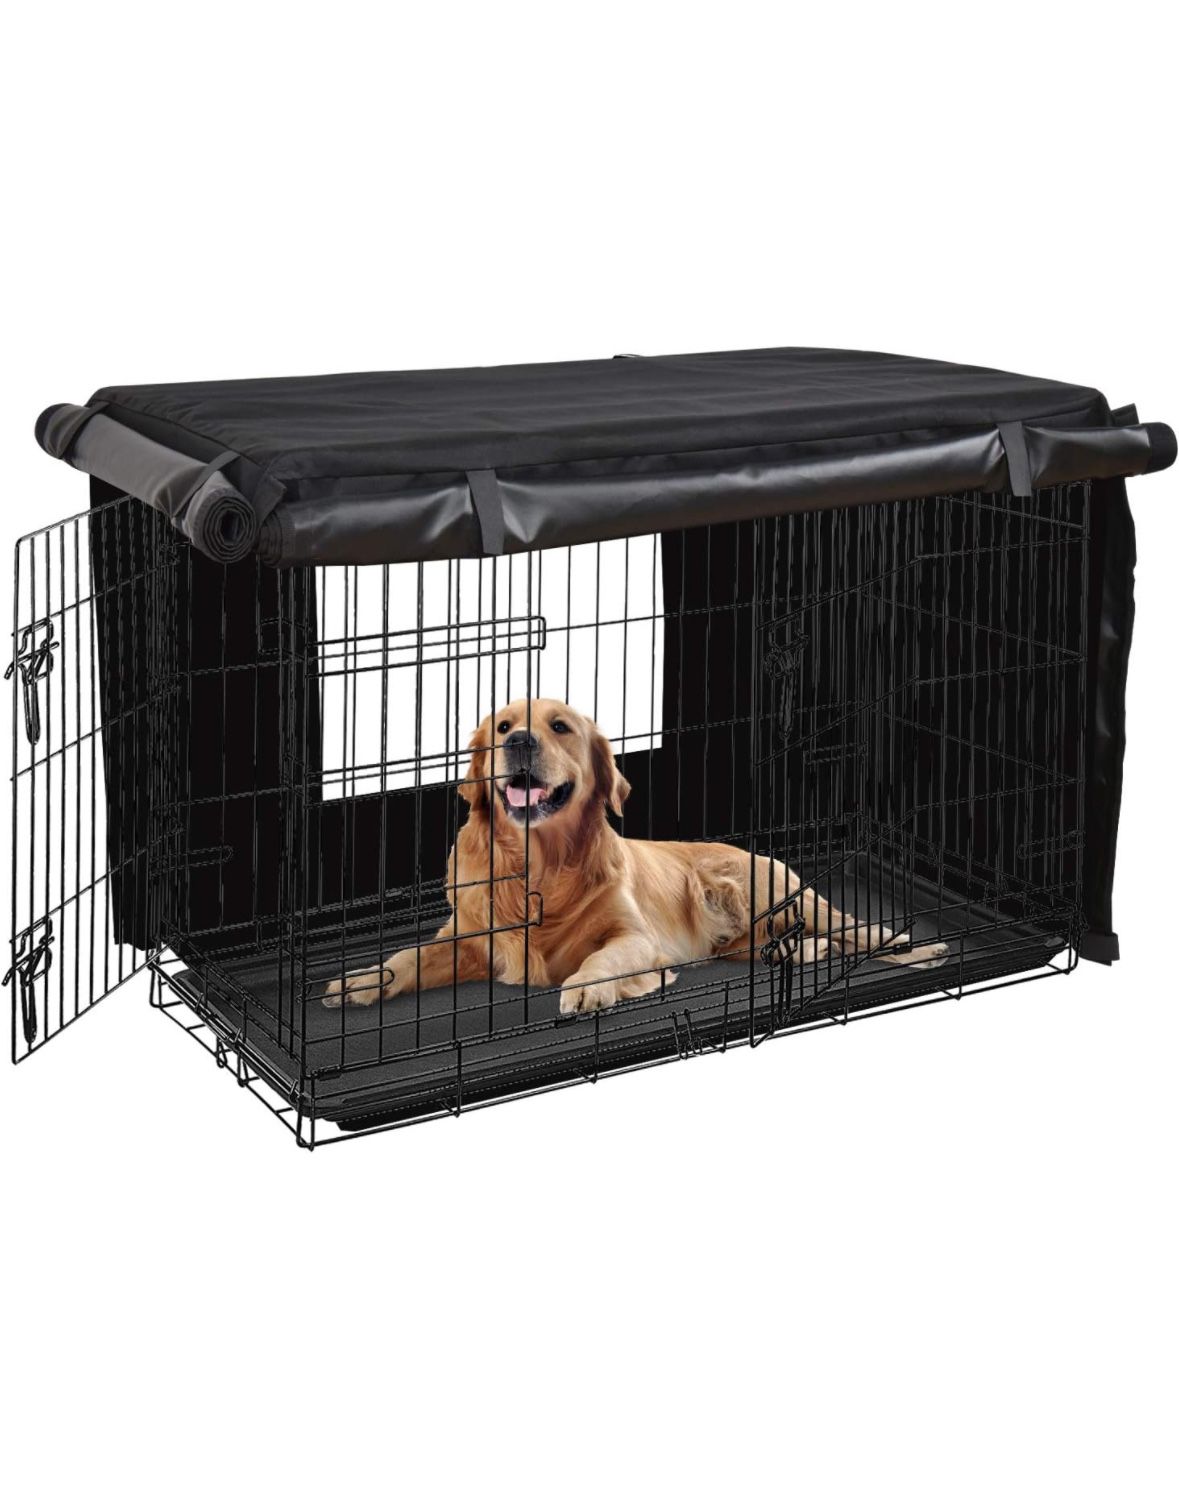 HONEST OUTFITTERS Dog Crate Cover 42 Inch Dog Kennel Cover for Large Dog, Heavy Duty Oxford Fabric,with Double Door, Pockets and Mesh Window (43L x 29